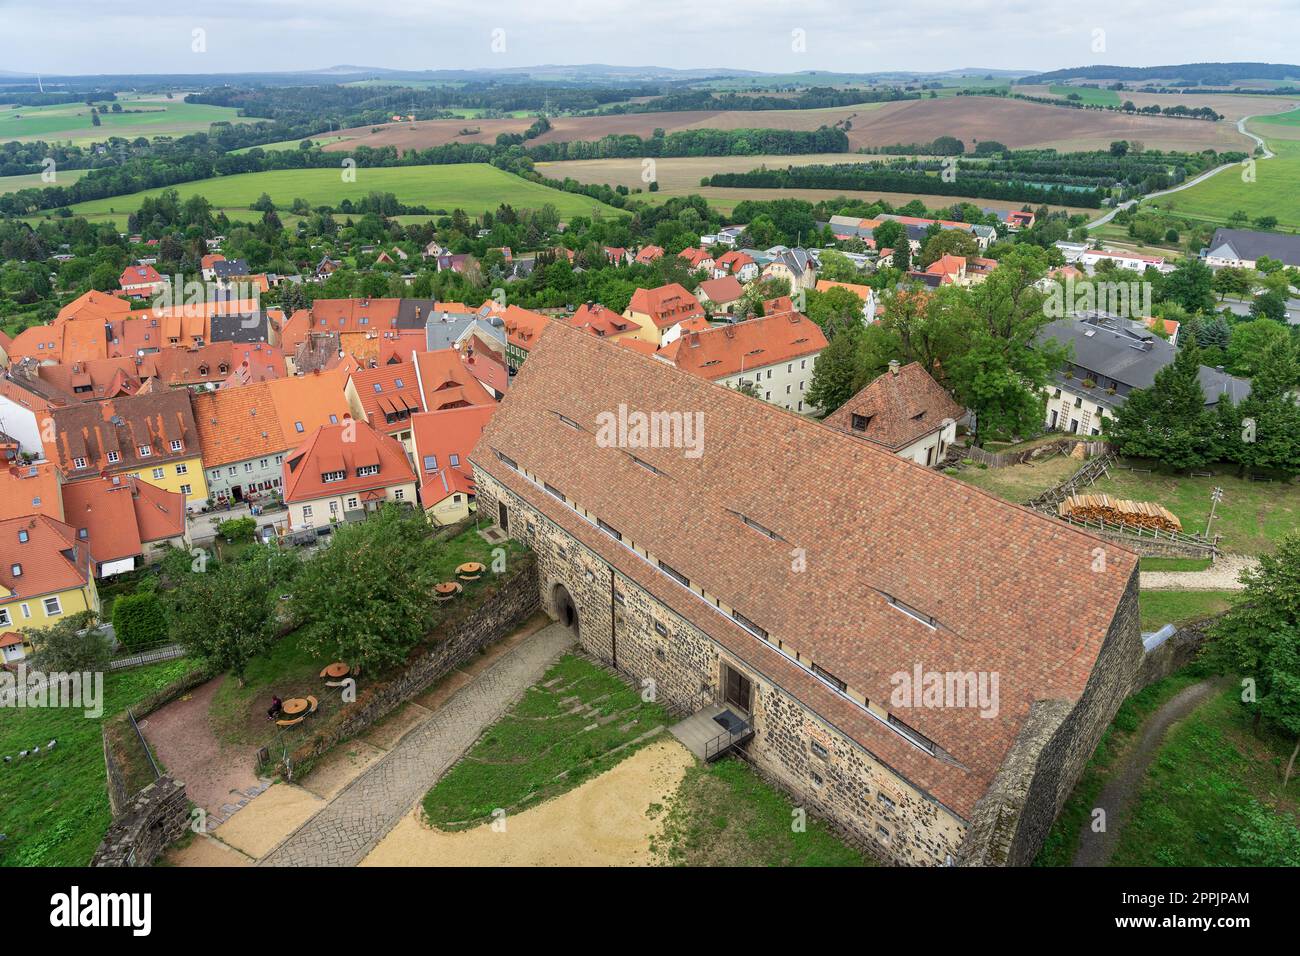 BURG STOLPEN, GERMANY - AUGUST 28, 2022: View of the city from the height of the watchtower of a medieval fortress on a basalt mountain. Saxony. Stock Photo